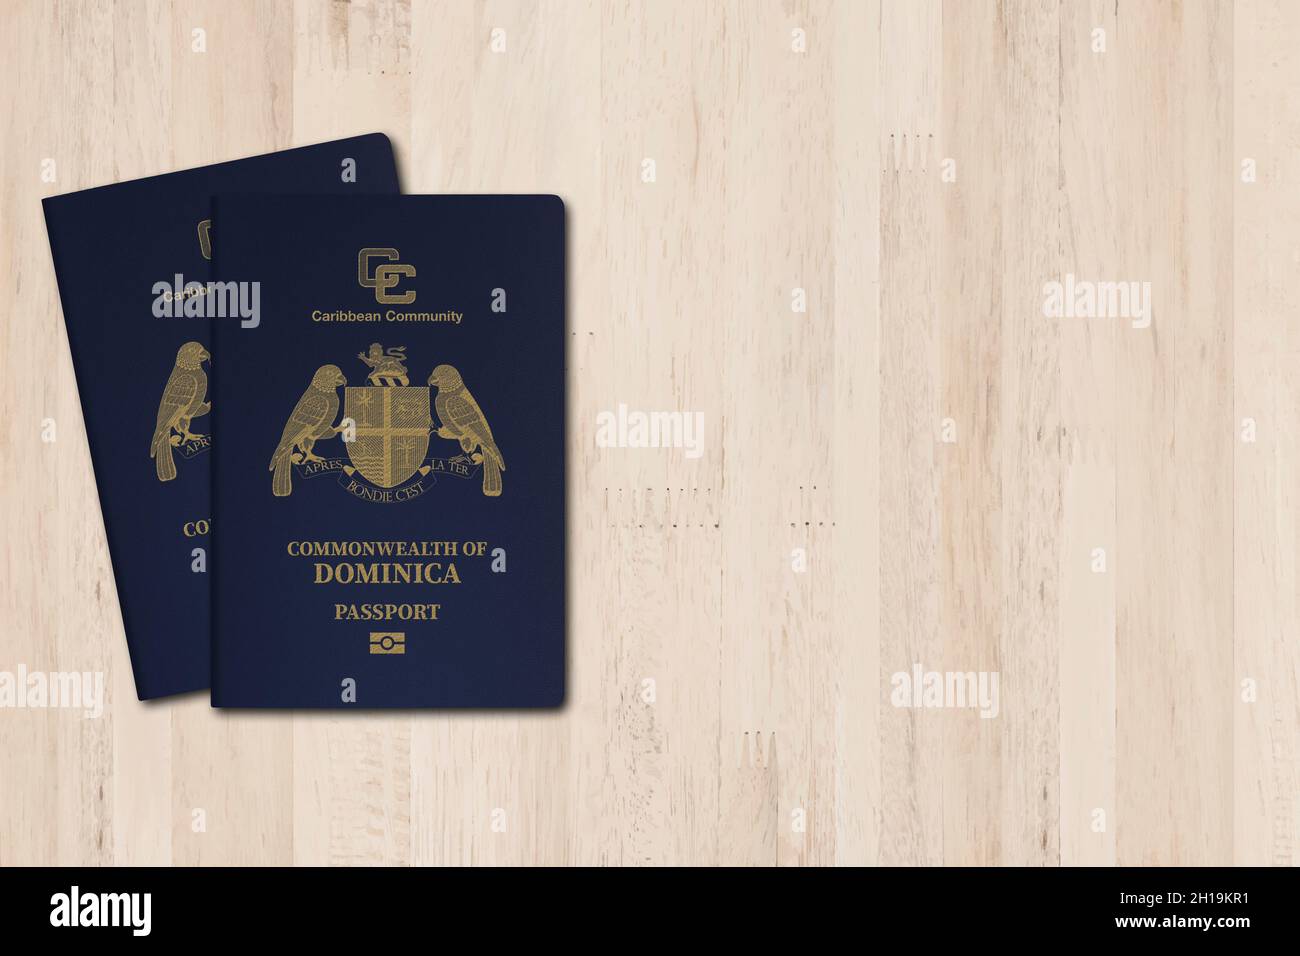 The Dominica passport is issued to citizens of the Commonwealth of Dominica for international travel, Dominica passport on a wooden background Stock Photo